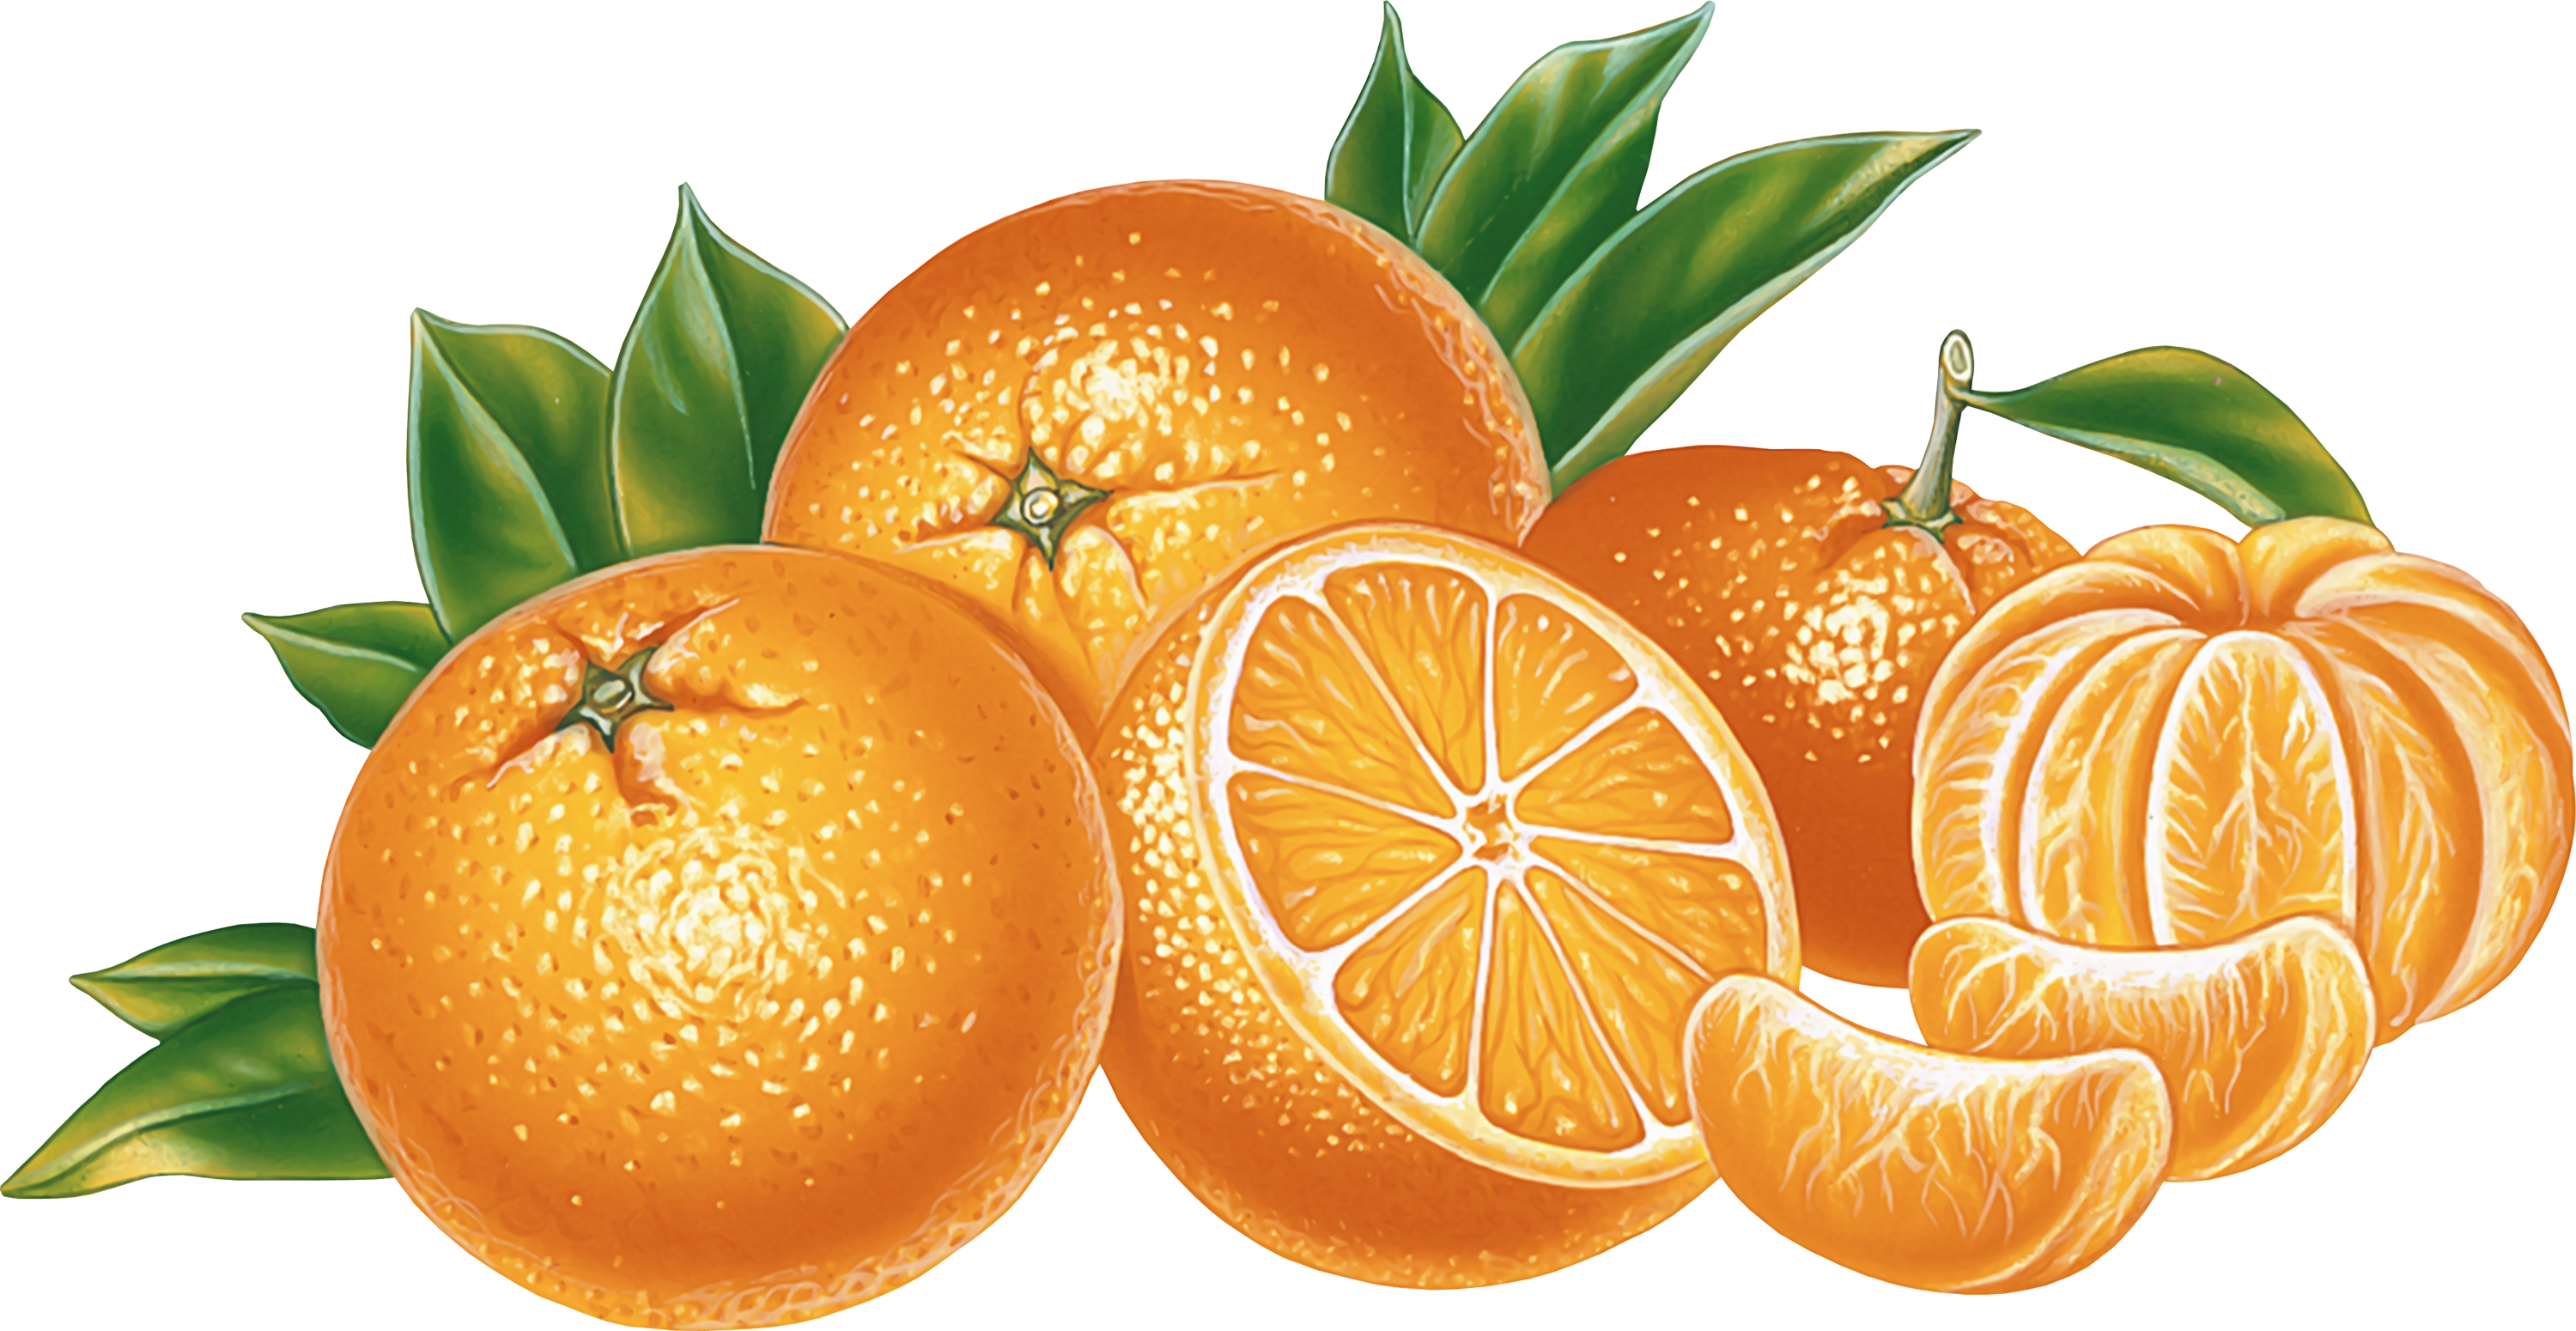 many oranges drawing PNG image